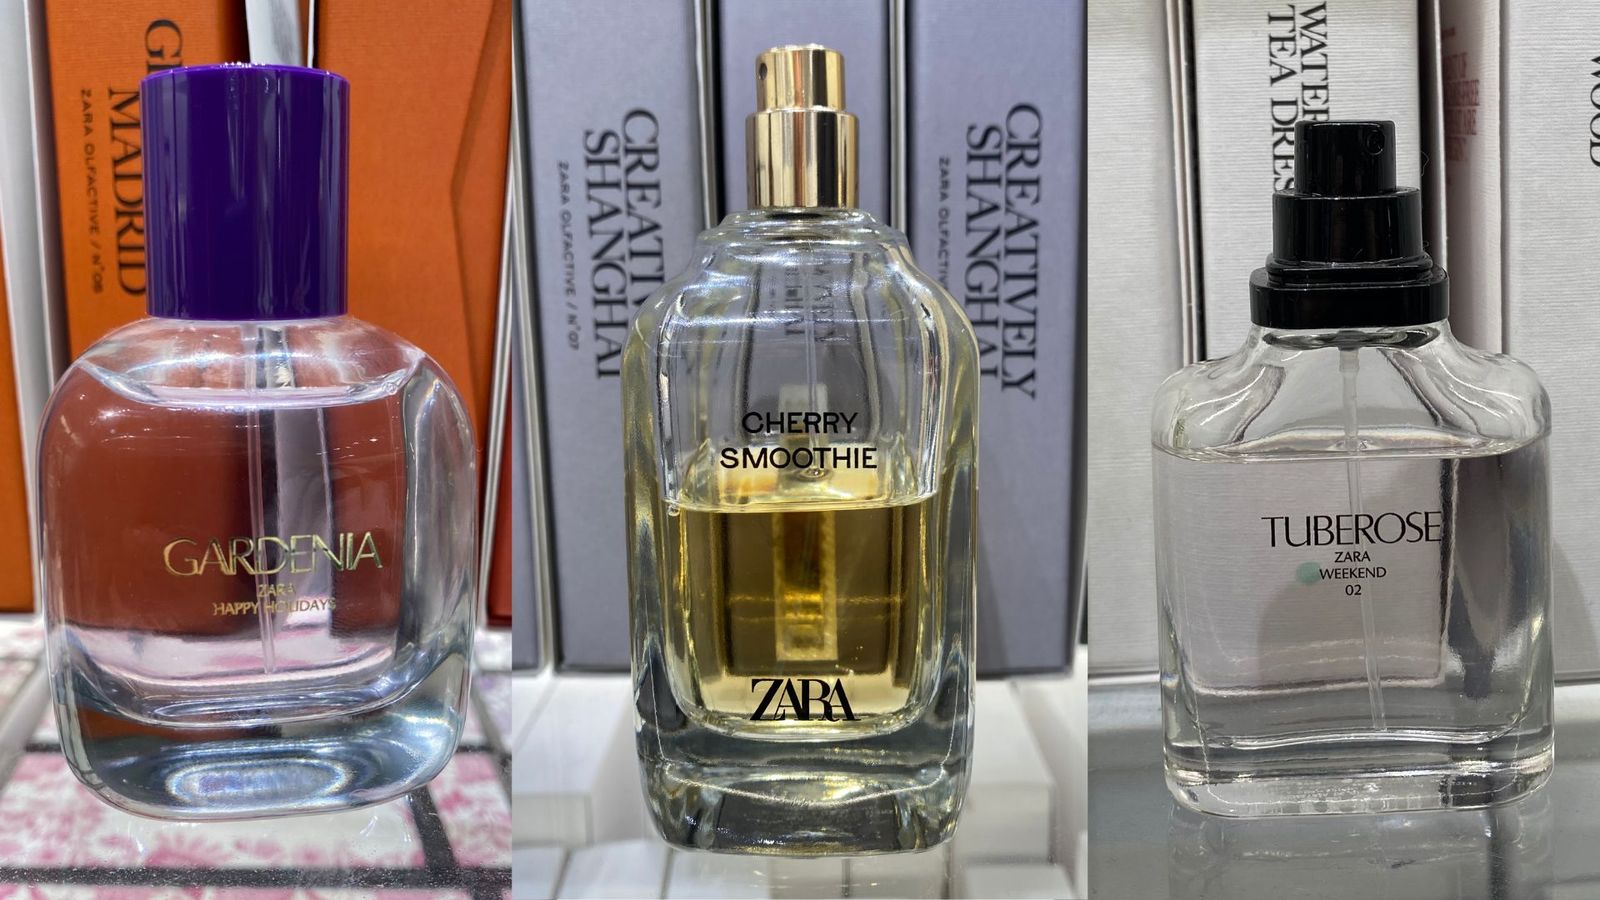 The 10 best Zara perfumes that you need in your collection